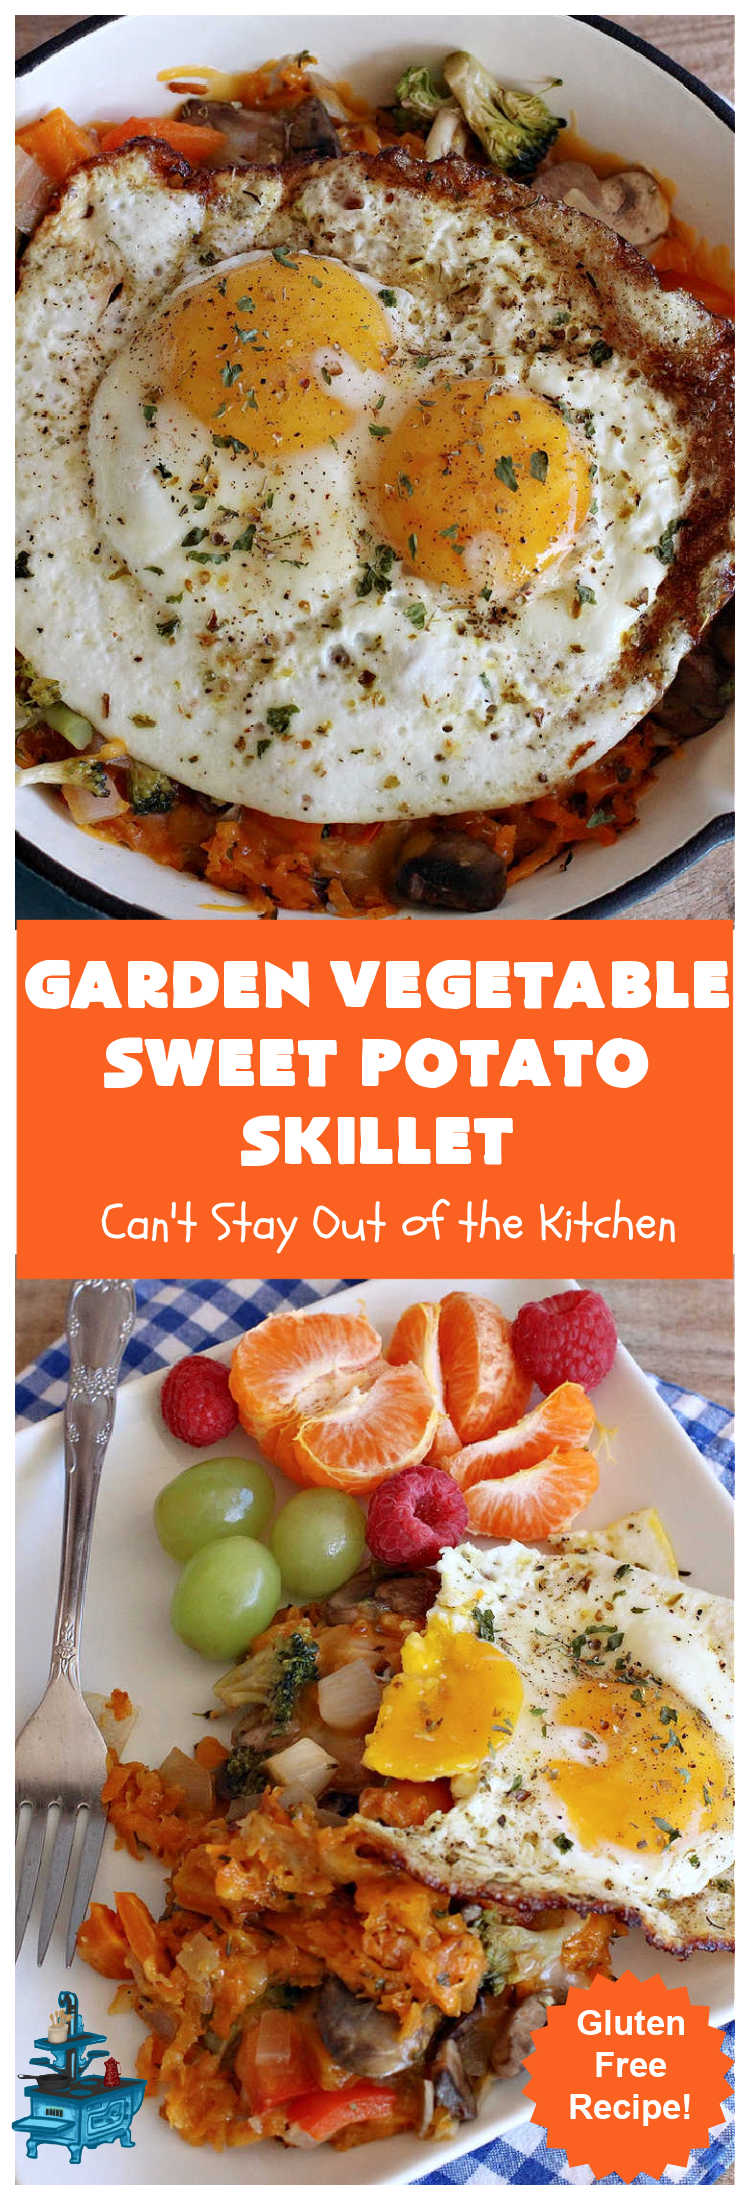 Garden Vegetable Sweet Potato Skillet | Can't Stay Out of the Kitchen